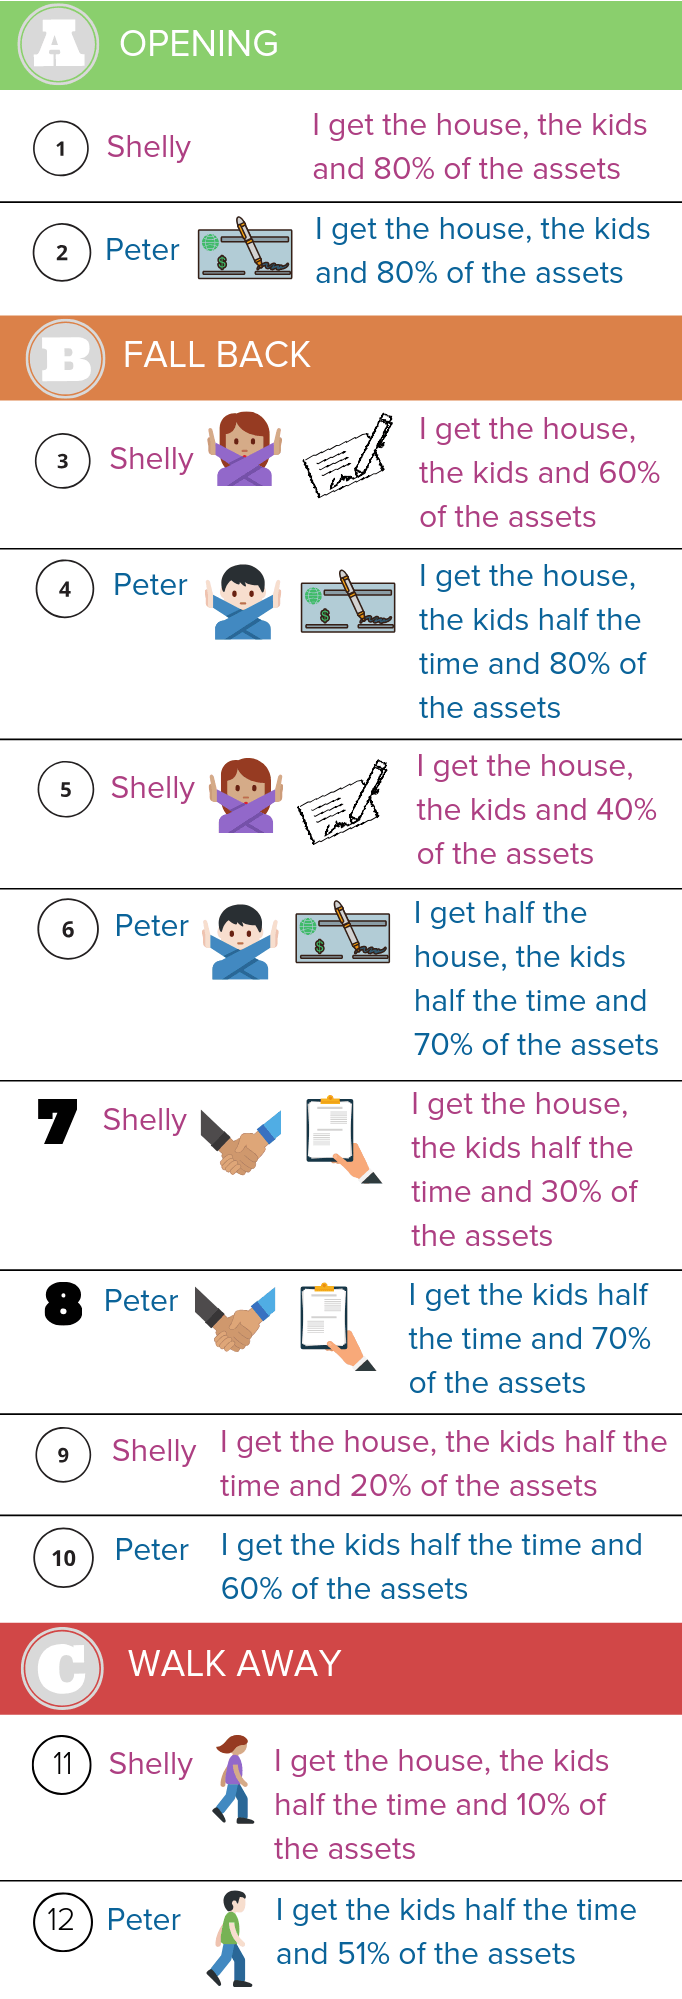 Illustration of a Shelly's and Peter's property and parenting negotiations. They start with their opening offers and then go back and forth in their fall back positions until an agreement has been reached.